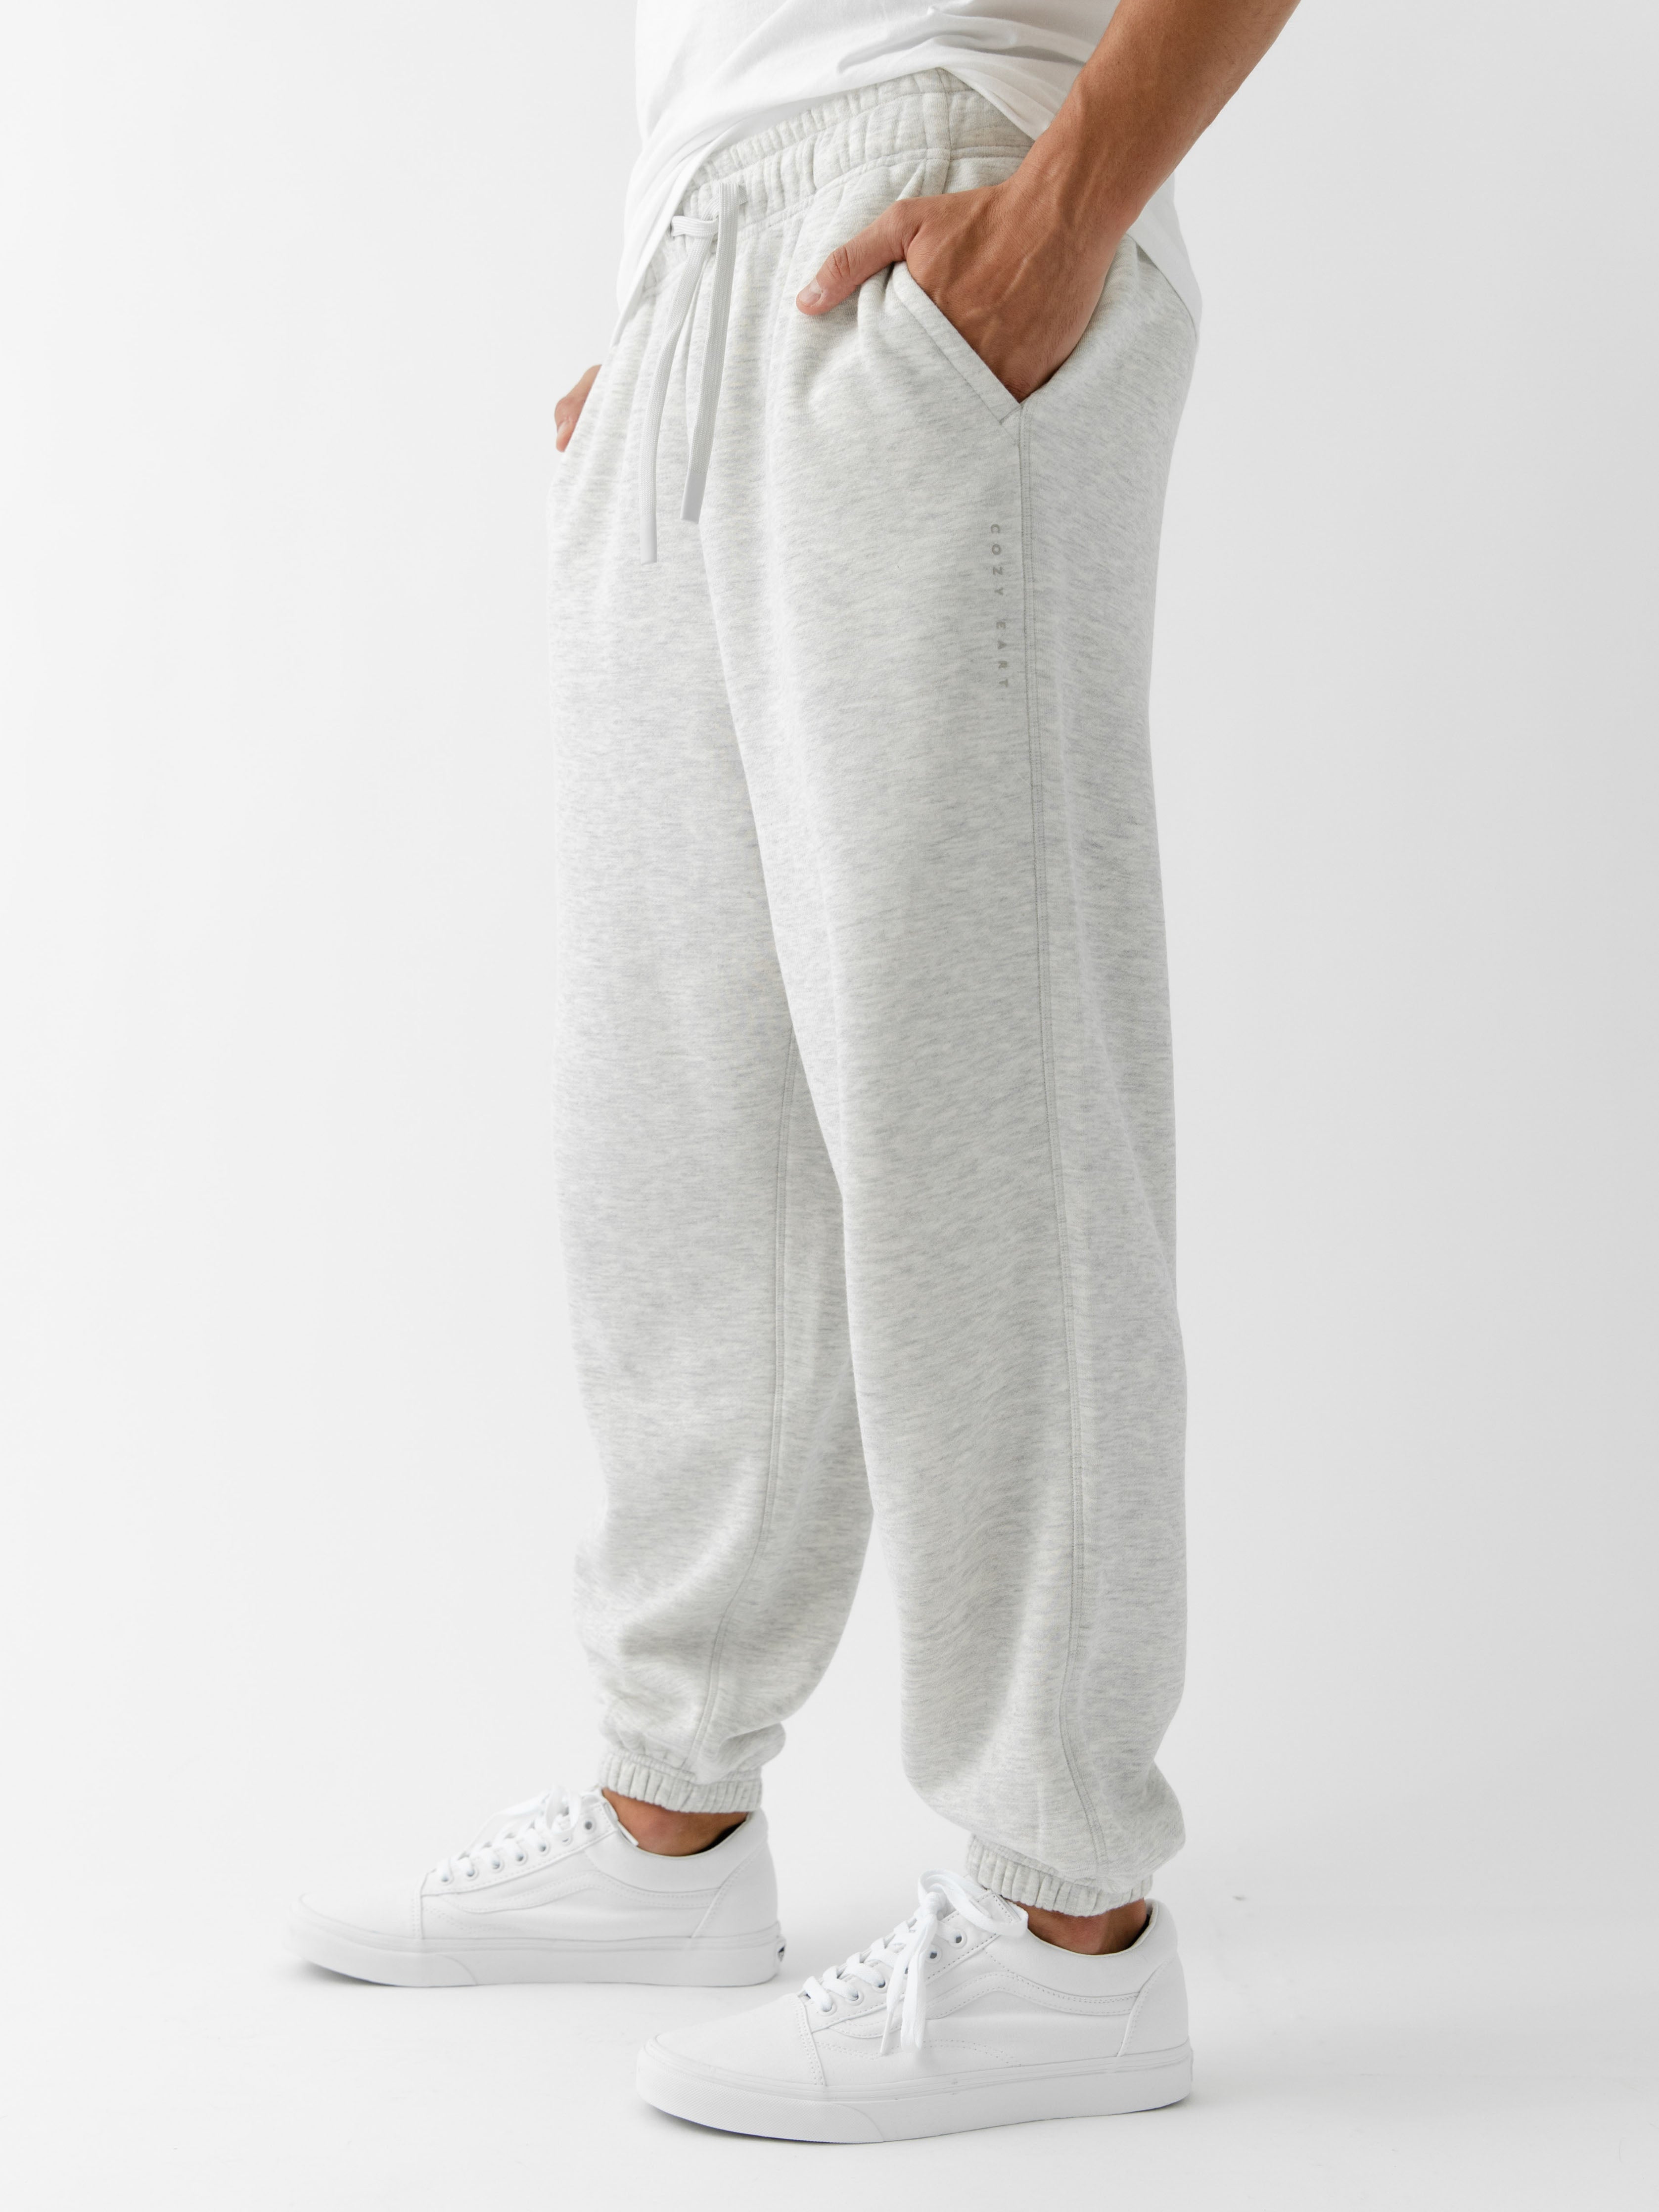 Heather Grey cityscape sweats with white background |Color:Heather Grey